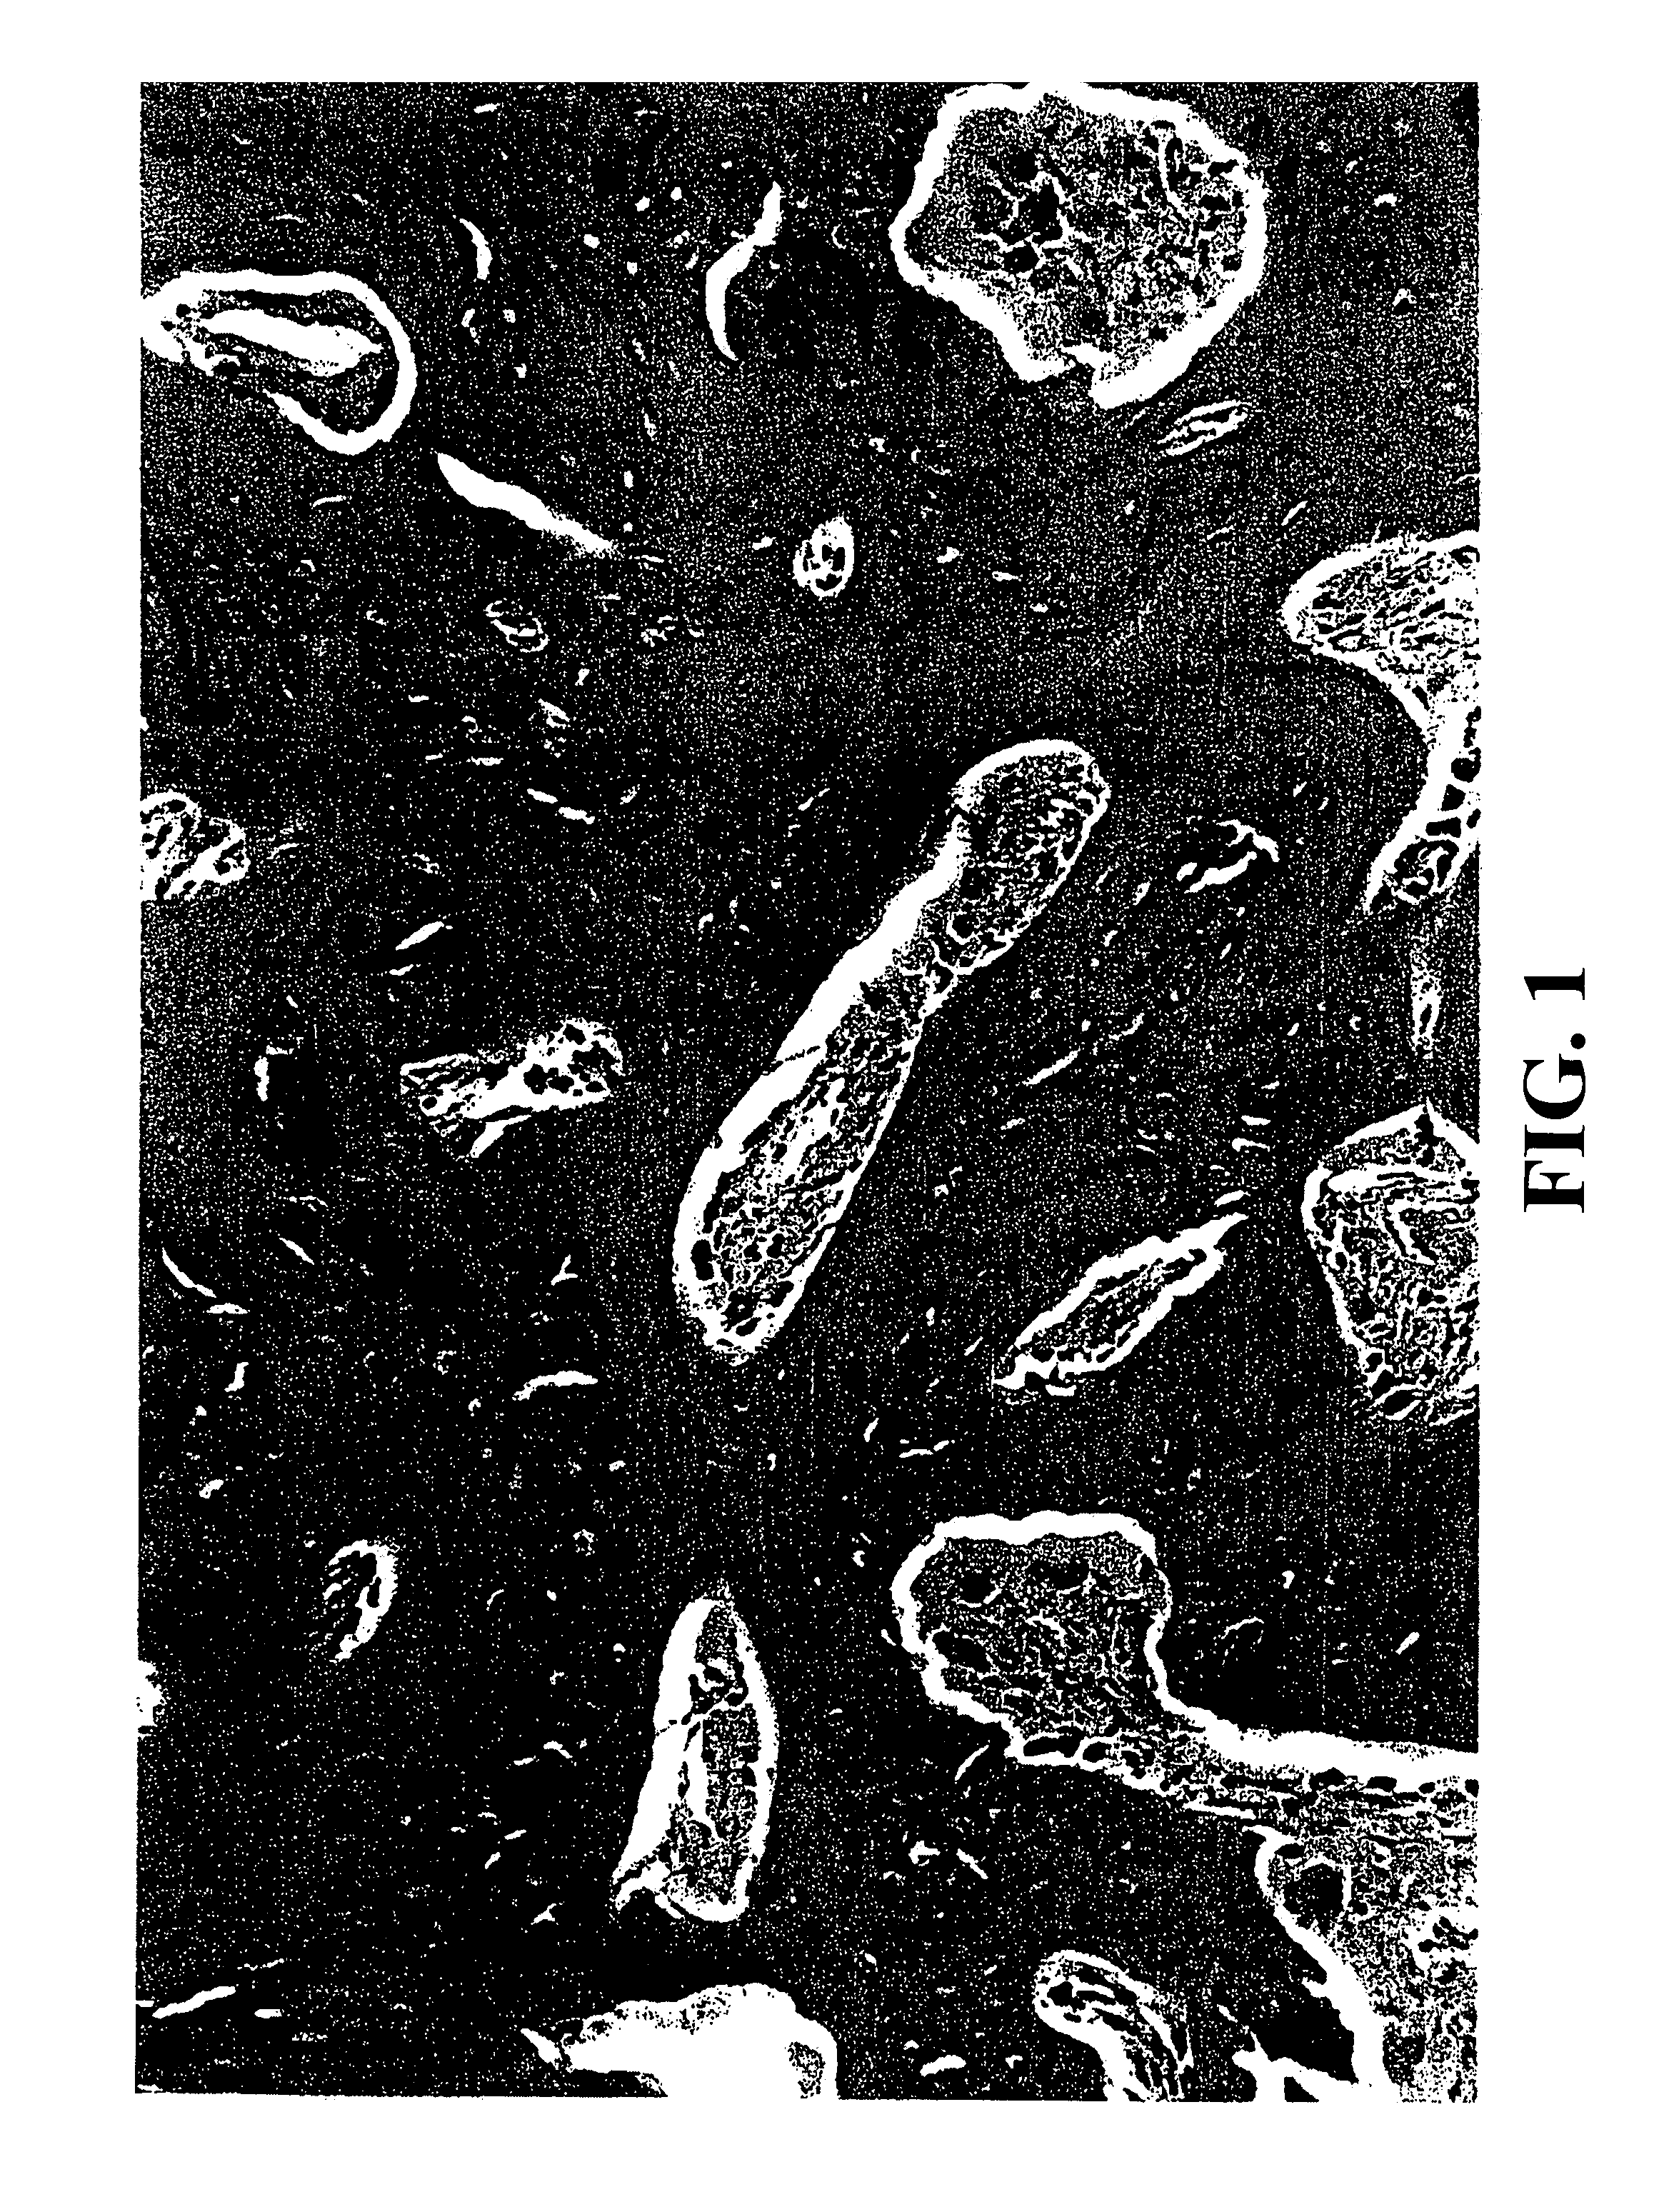 Transplantable particulate bone composition having high osteoinductive capacity and methods for making and using same